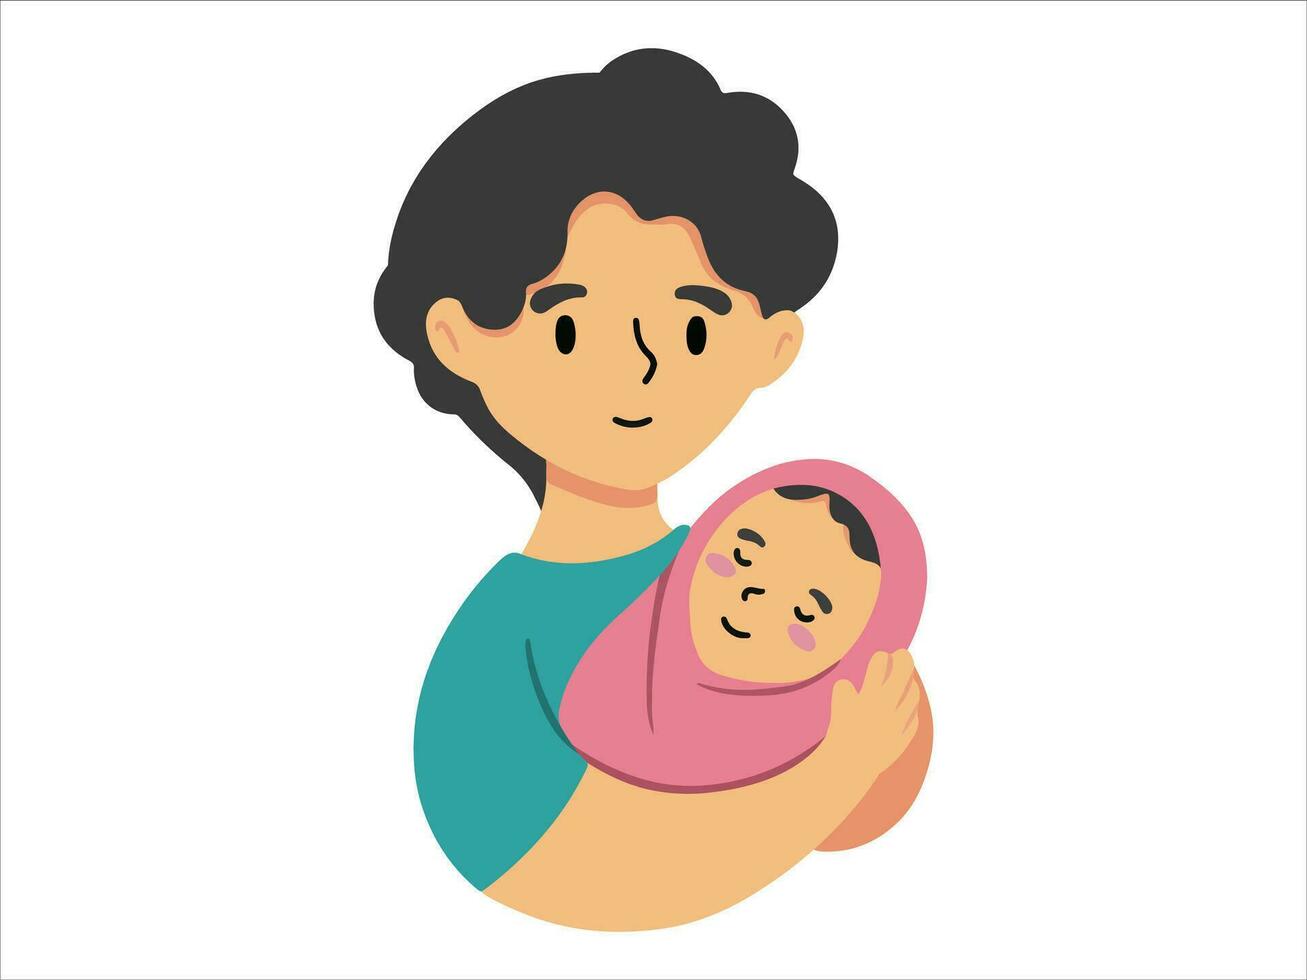 vader Holding baby of avatar icoon illustratie vector